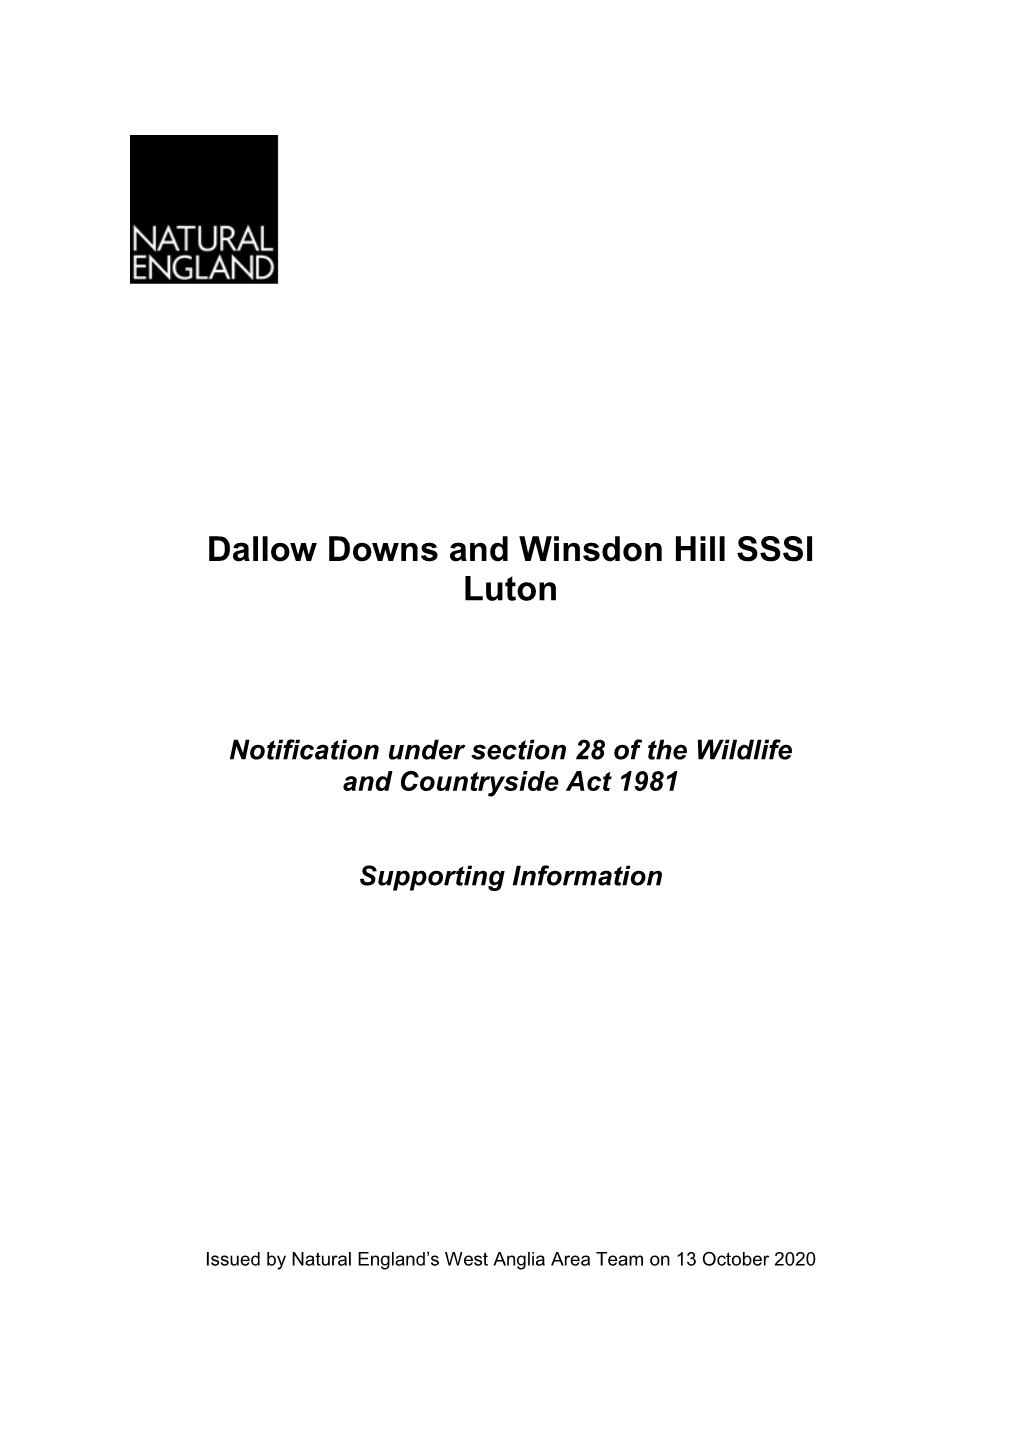 Dallow Downs and Winsdon Hill SSSI Luton